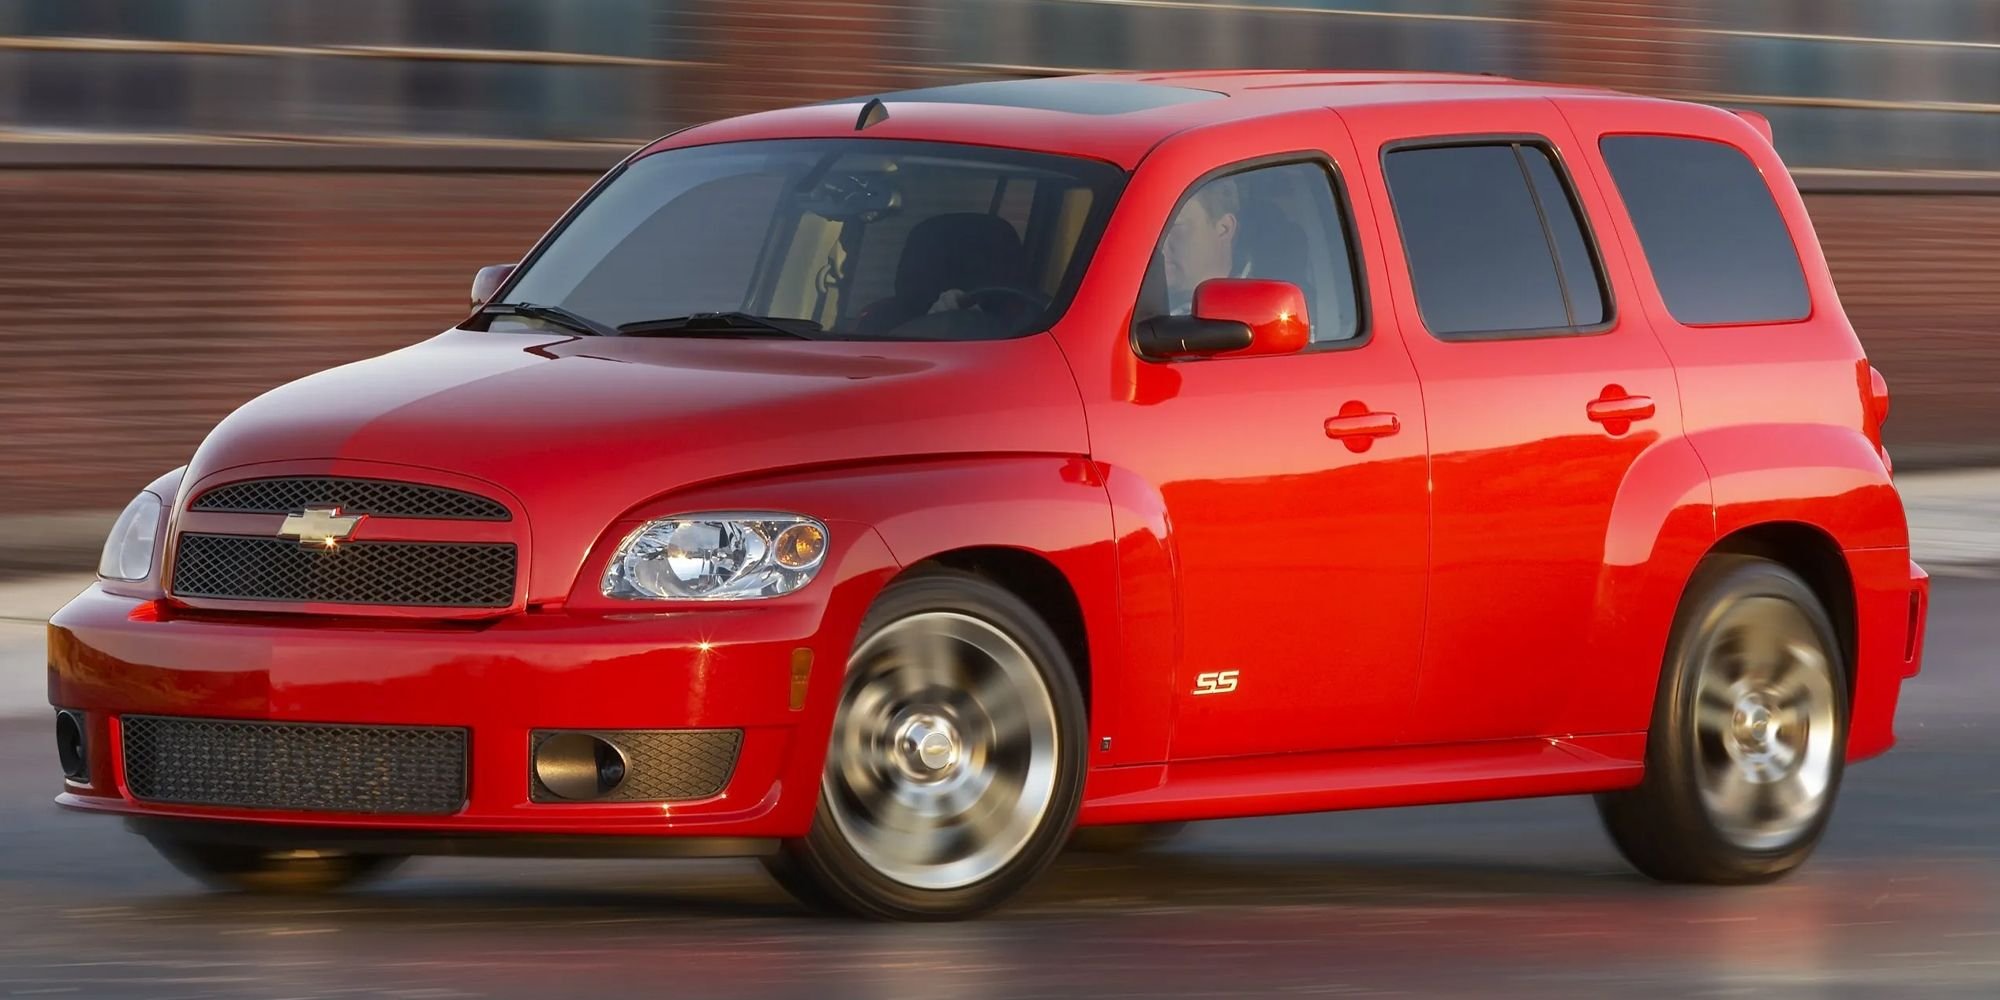 Car Companies Charged Way Too Much For These Ugly Cars